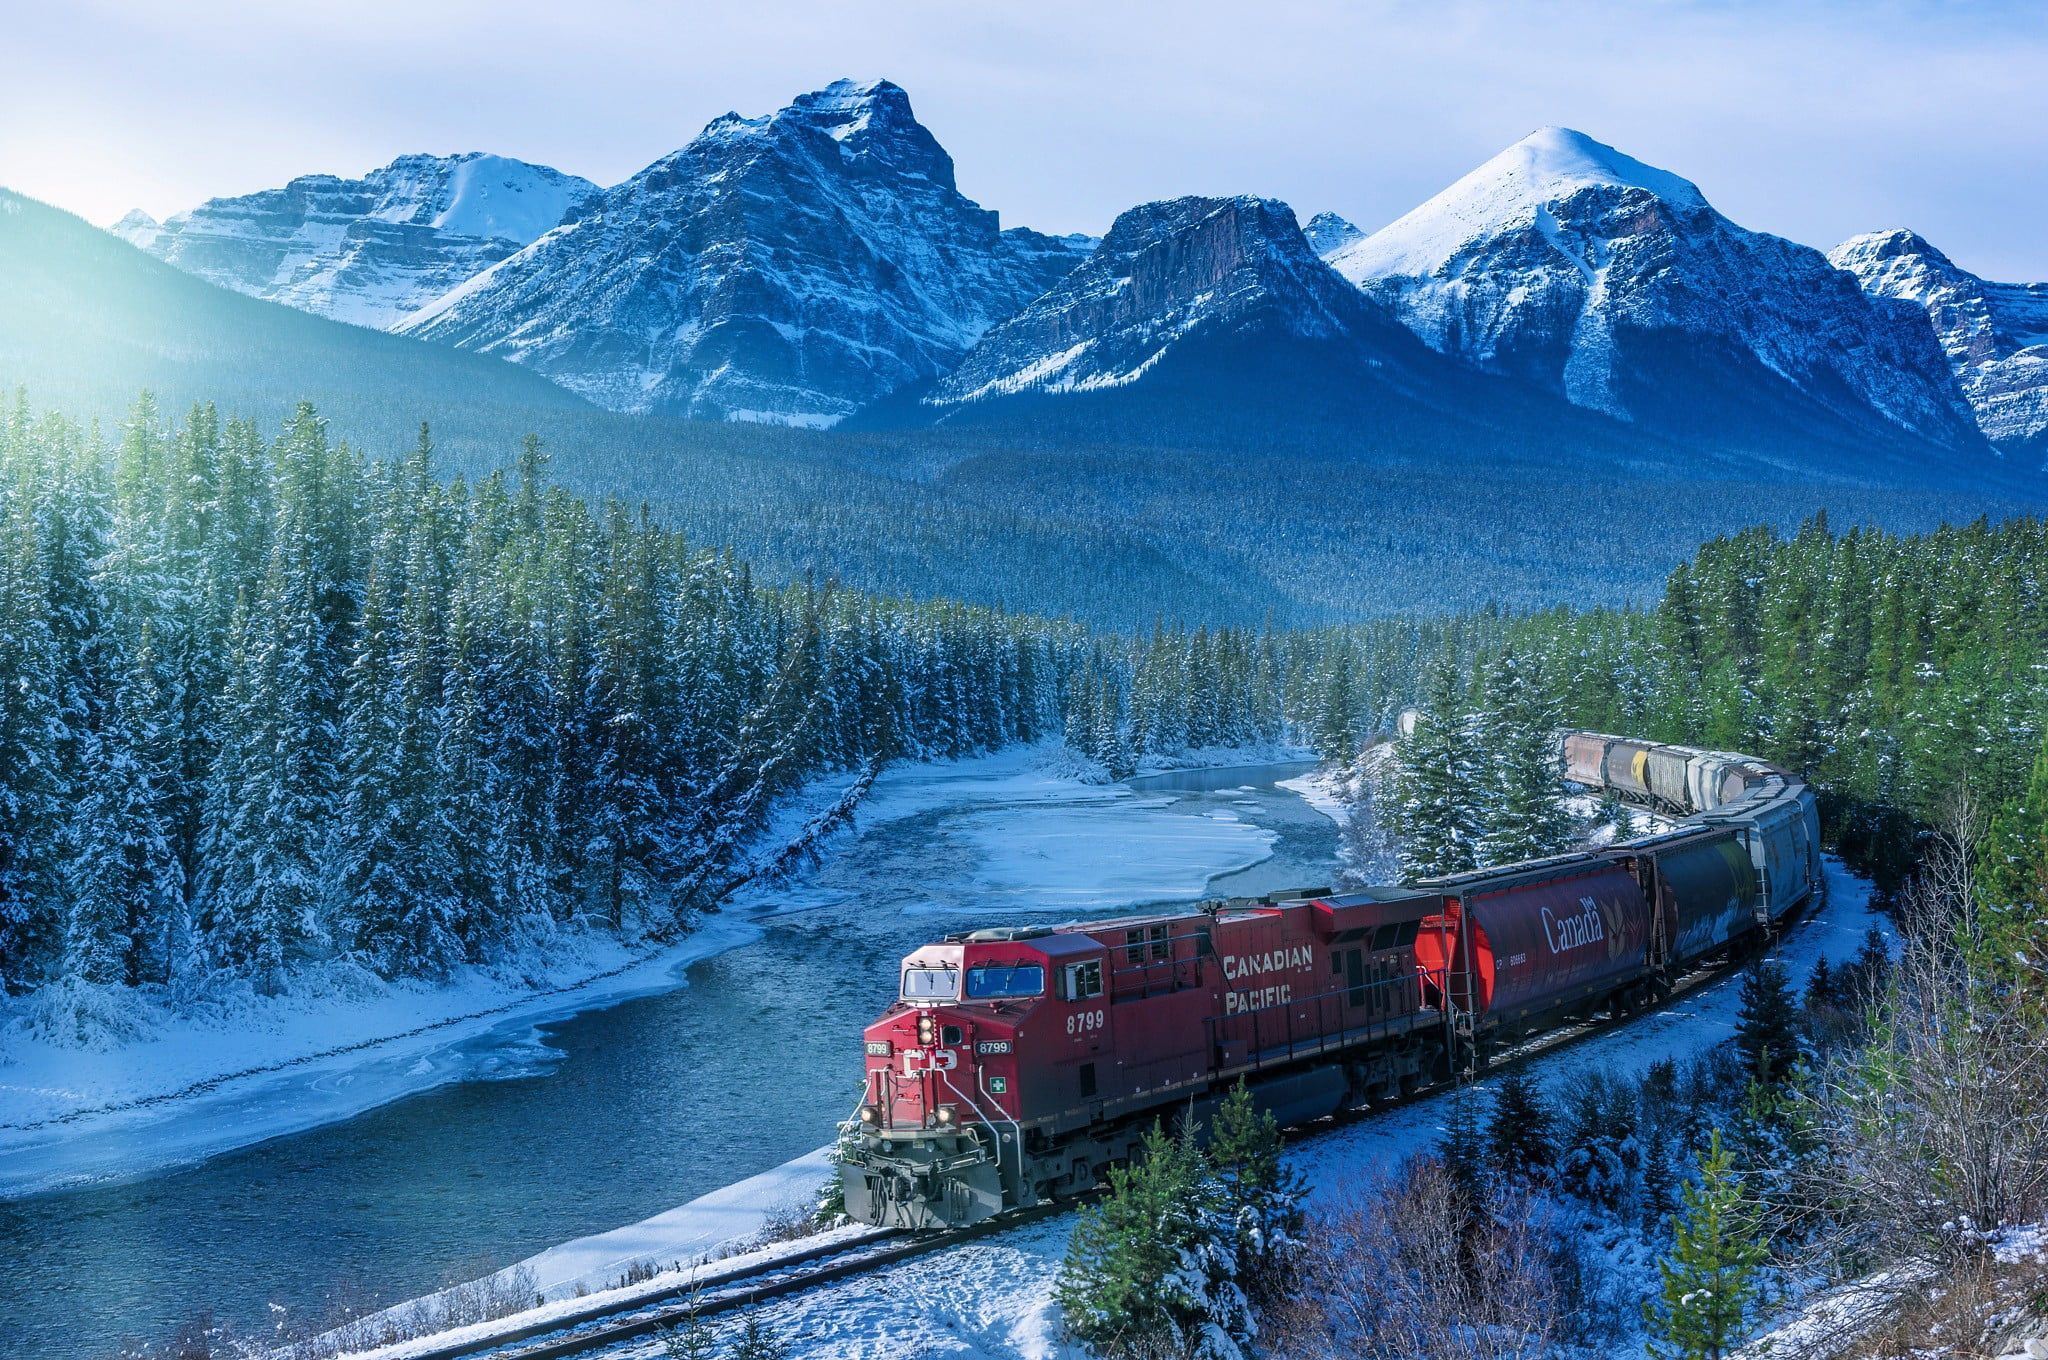 red train, red train on rail photography #train #Canada #landscape #mountains #trees #snow snowy peak. Train wallpaper, Canada landscape, Canadian pacific railway